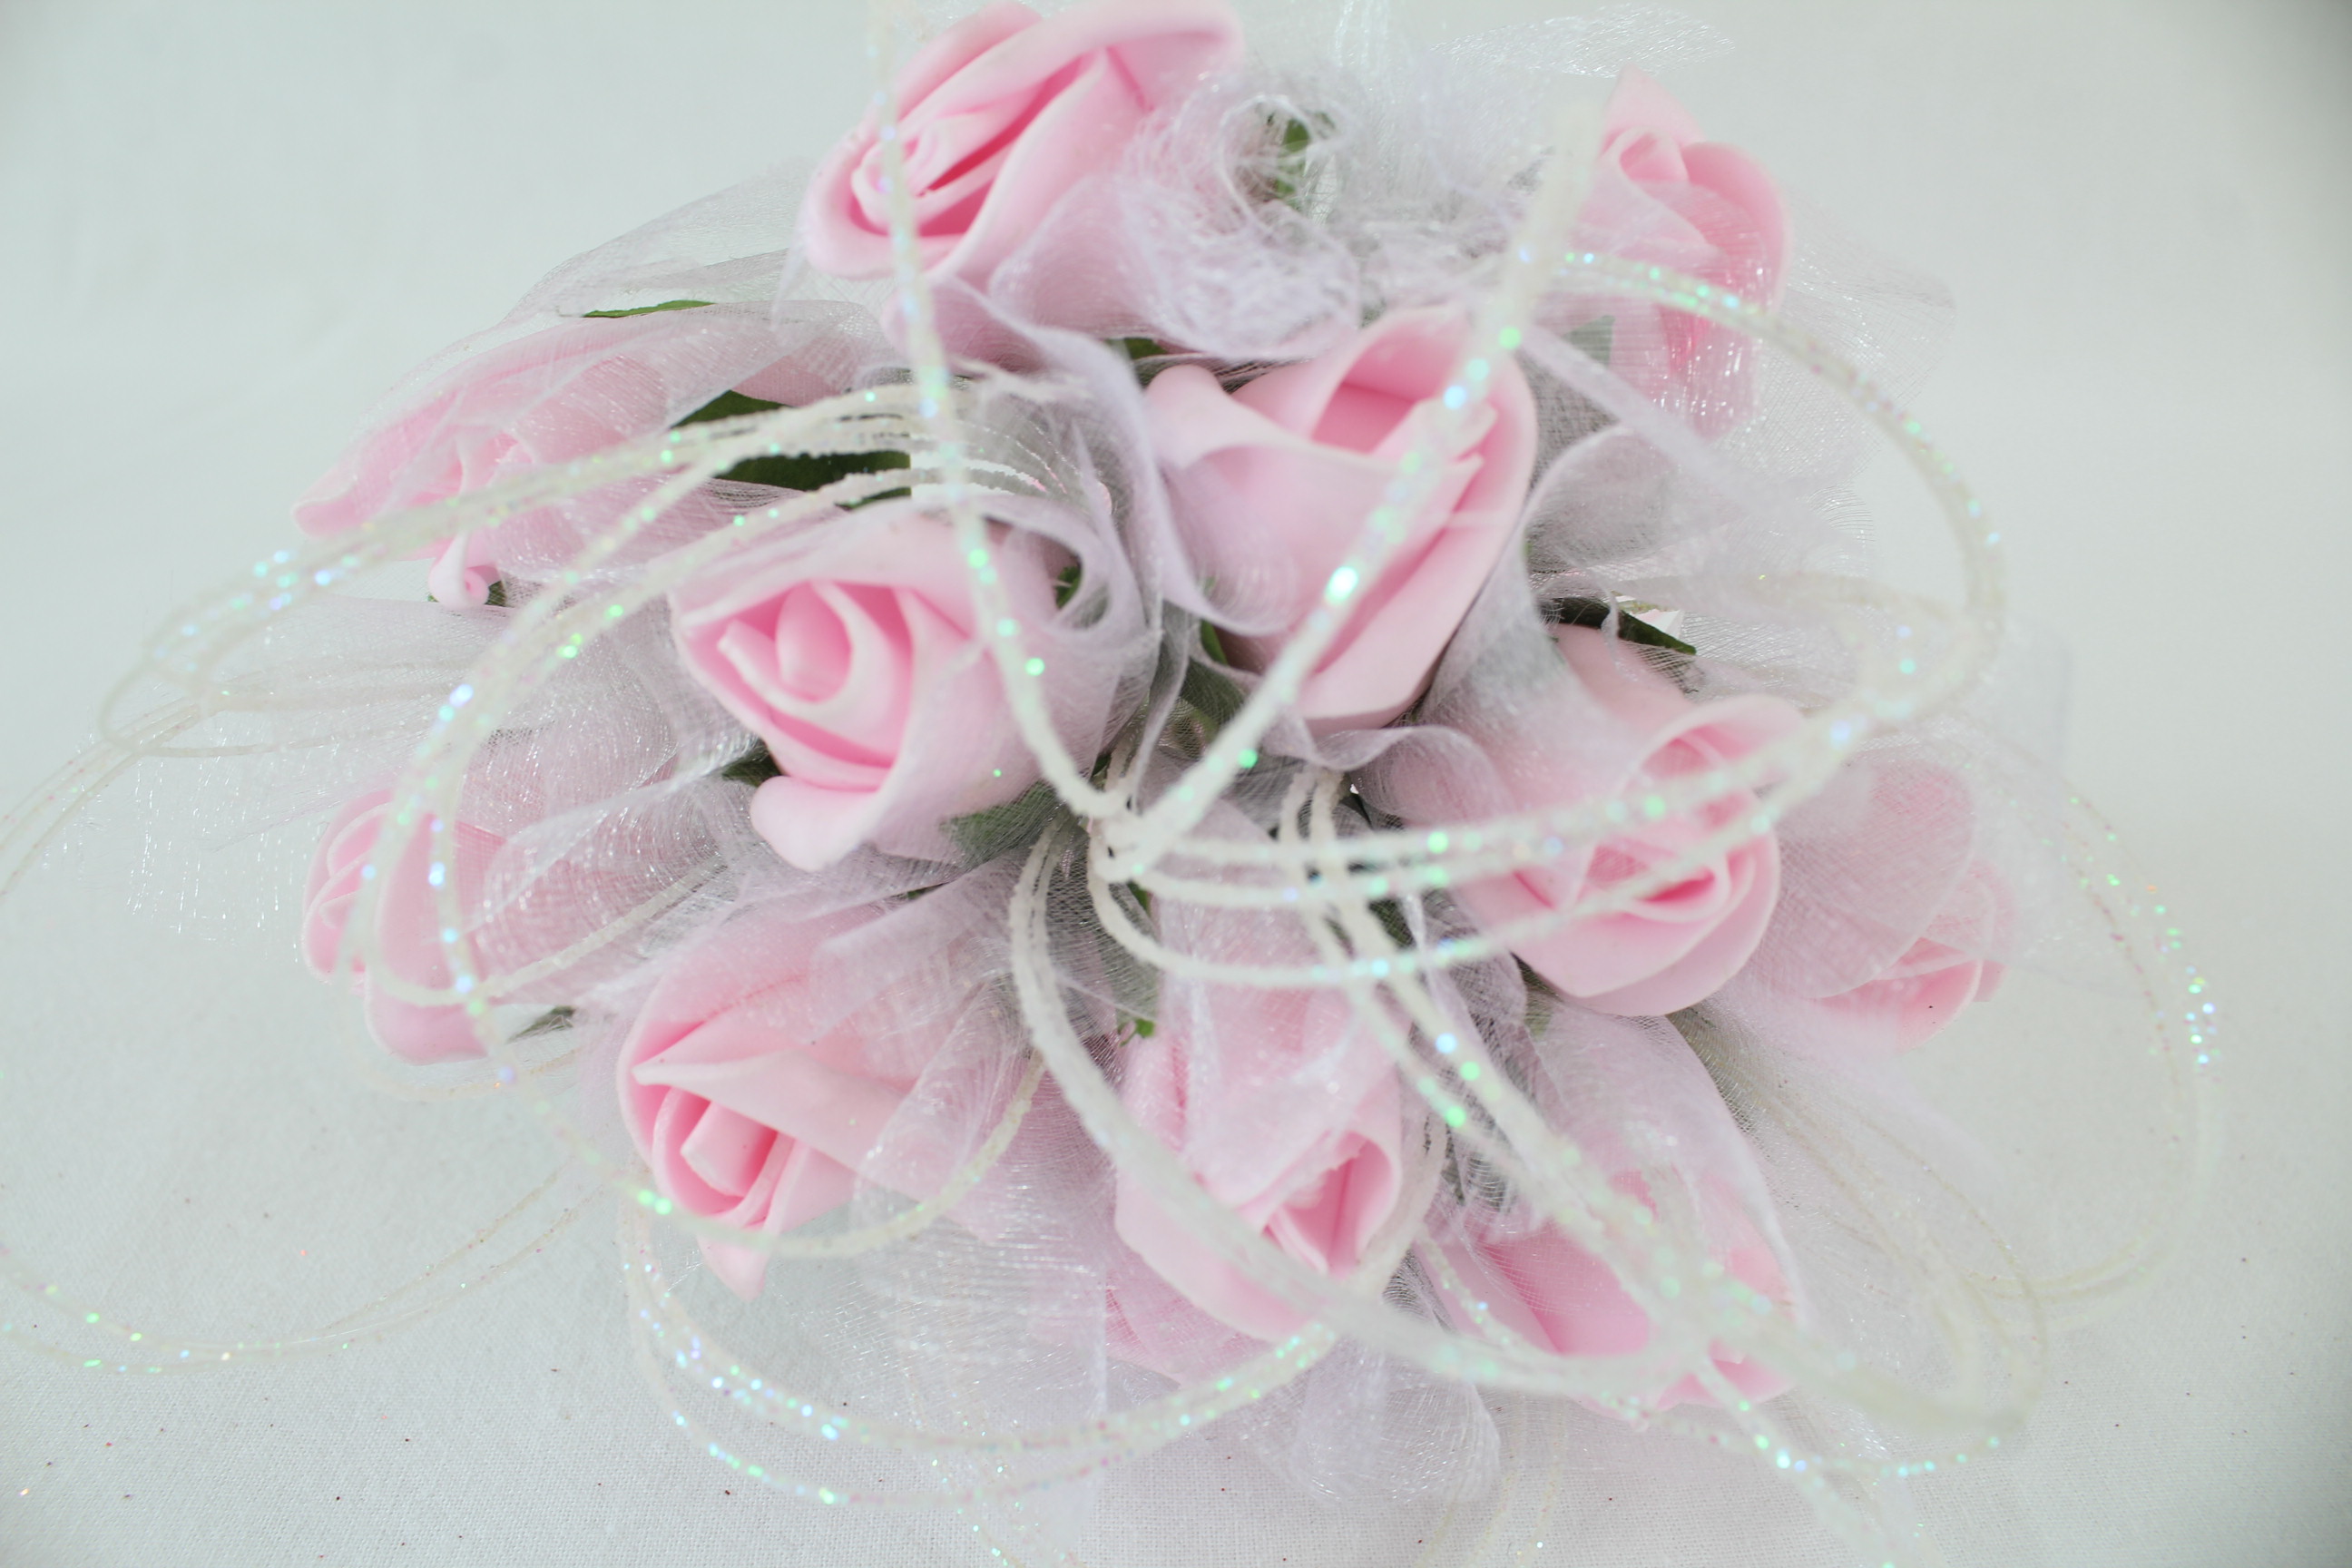 2 x Posey Of 12 Foam Rose Buds With Tulle Wrap